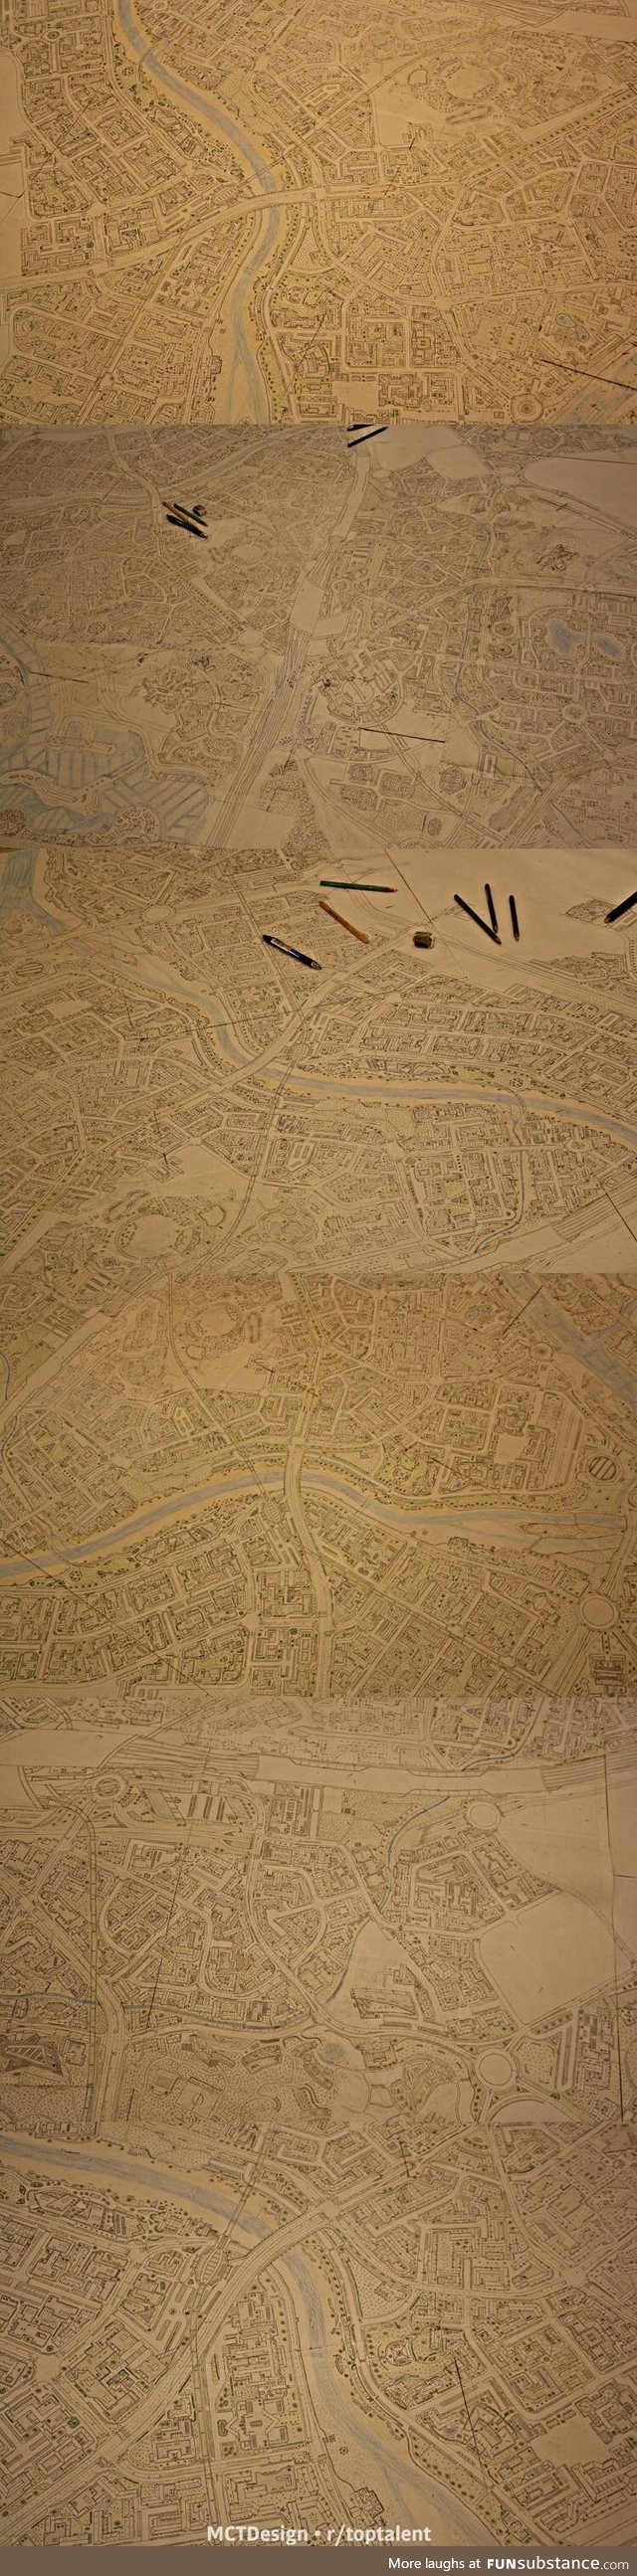 A designer spent several years drawing a city by hand to appreciate AutoCAD